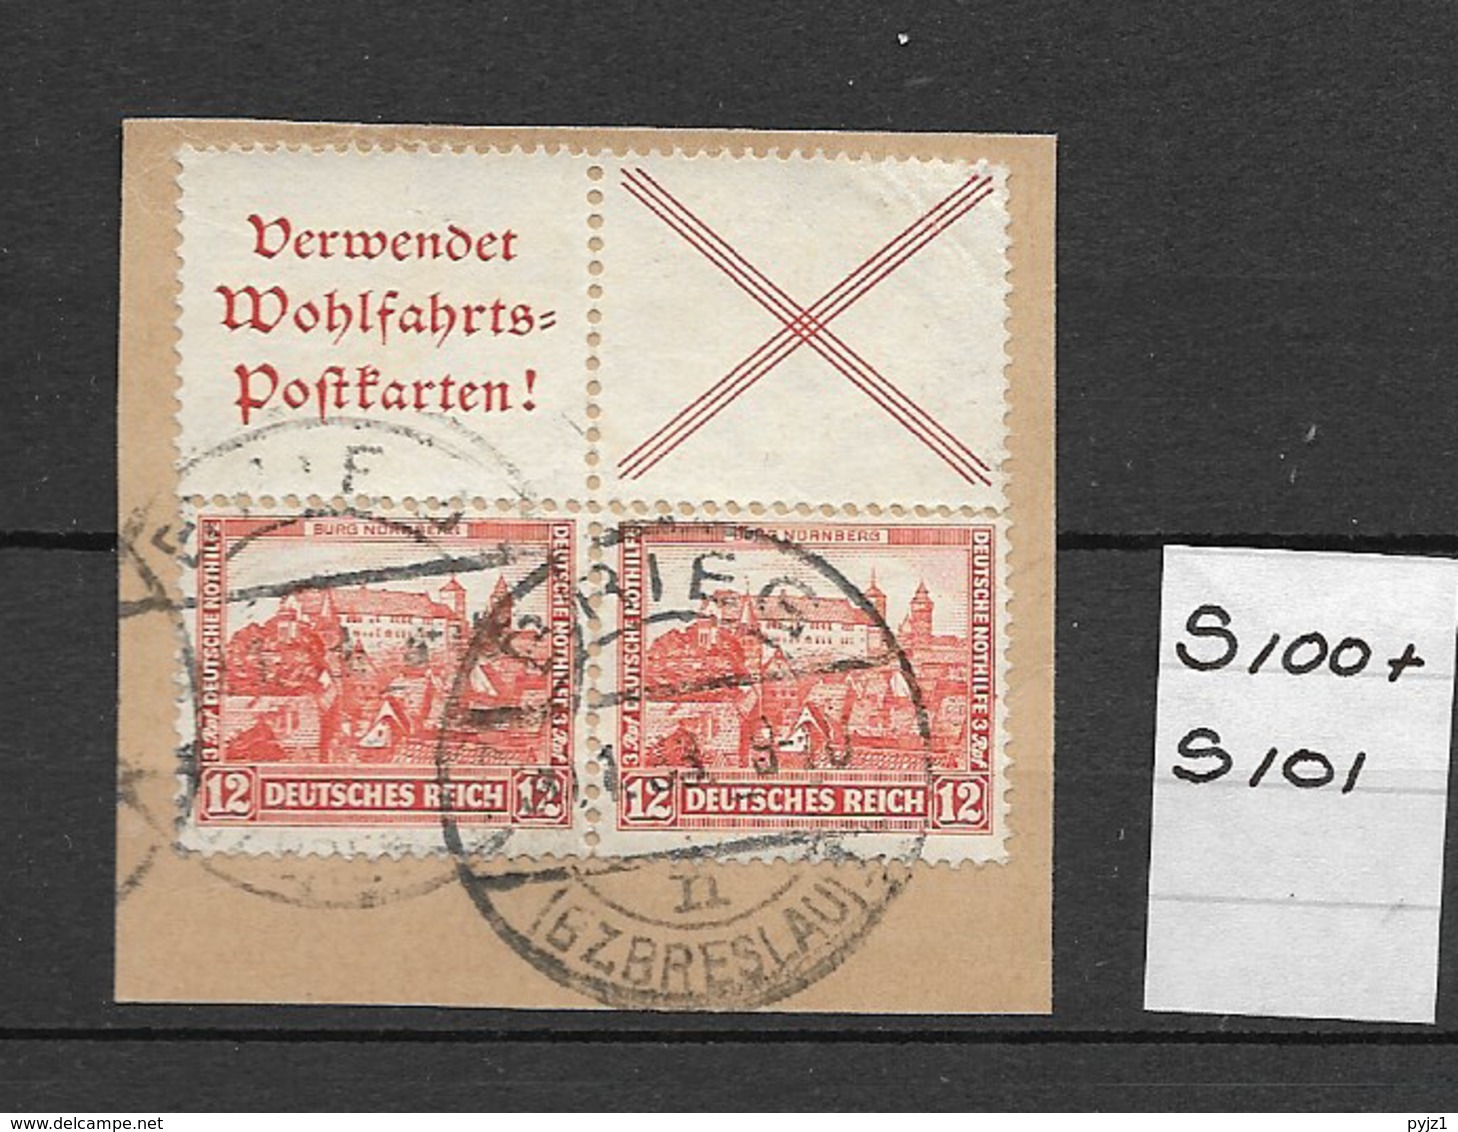 1932 USED Germany, Nothilfe, S100 + S101 - Se-Tenant